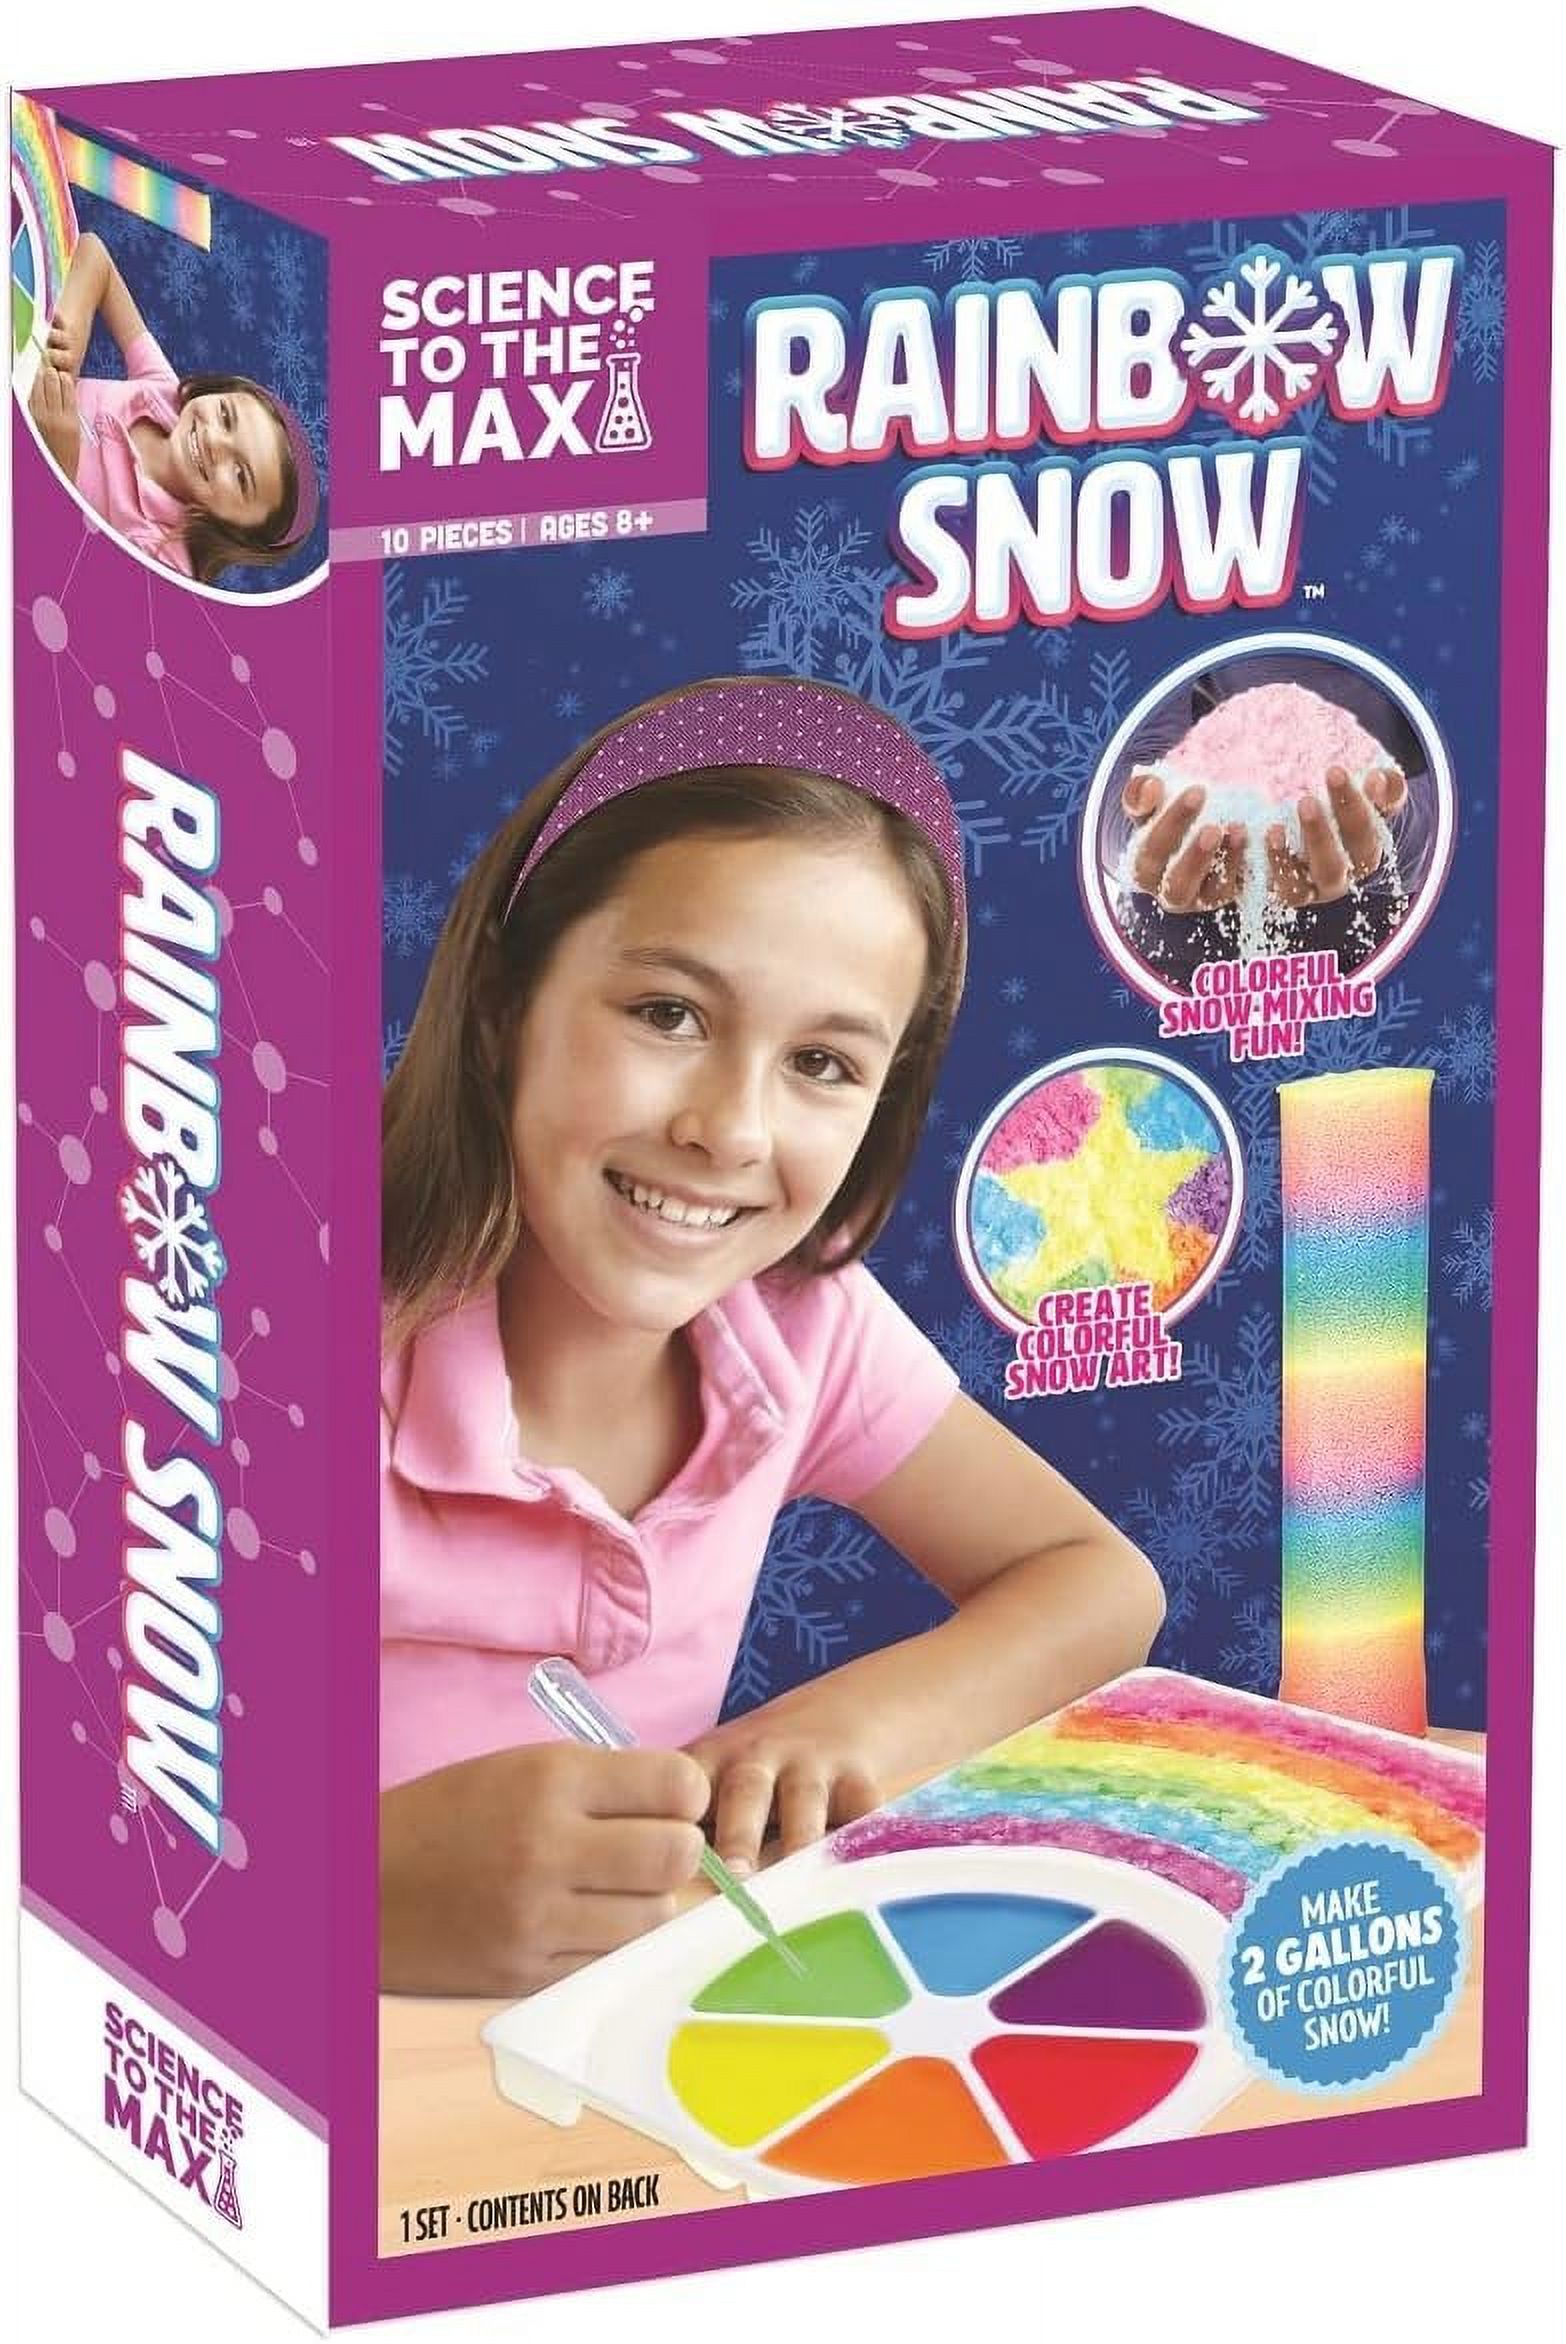 Science to The Max Rainbow Snow- Create 2 Gallon of Colorful and Reusable Snow- 7 Science Experiments Included - Stem Activity Kit for Boys & Girls 8+- Snow for Winter Display - image 1 of 10